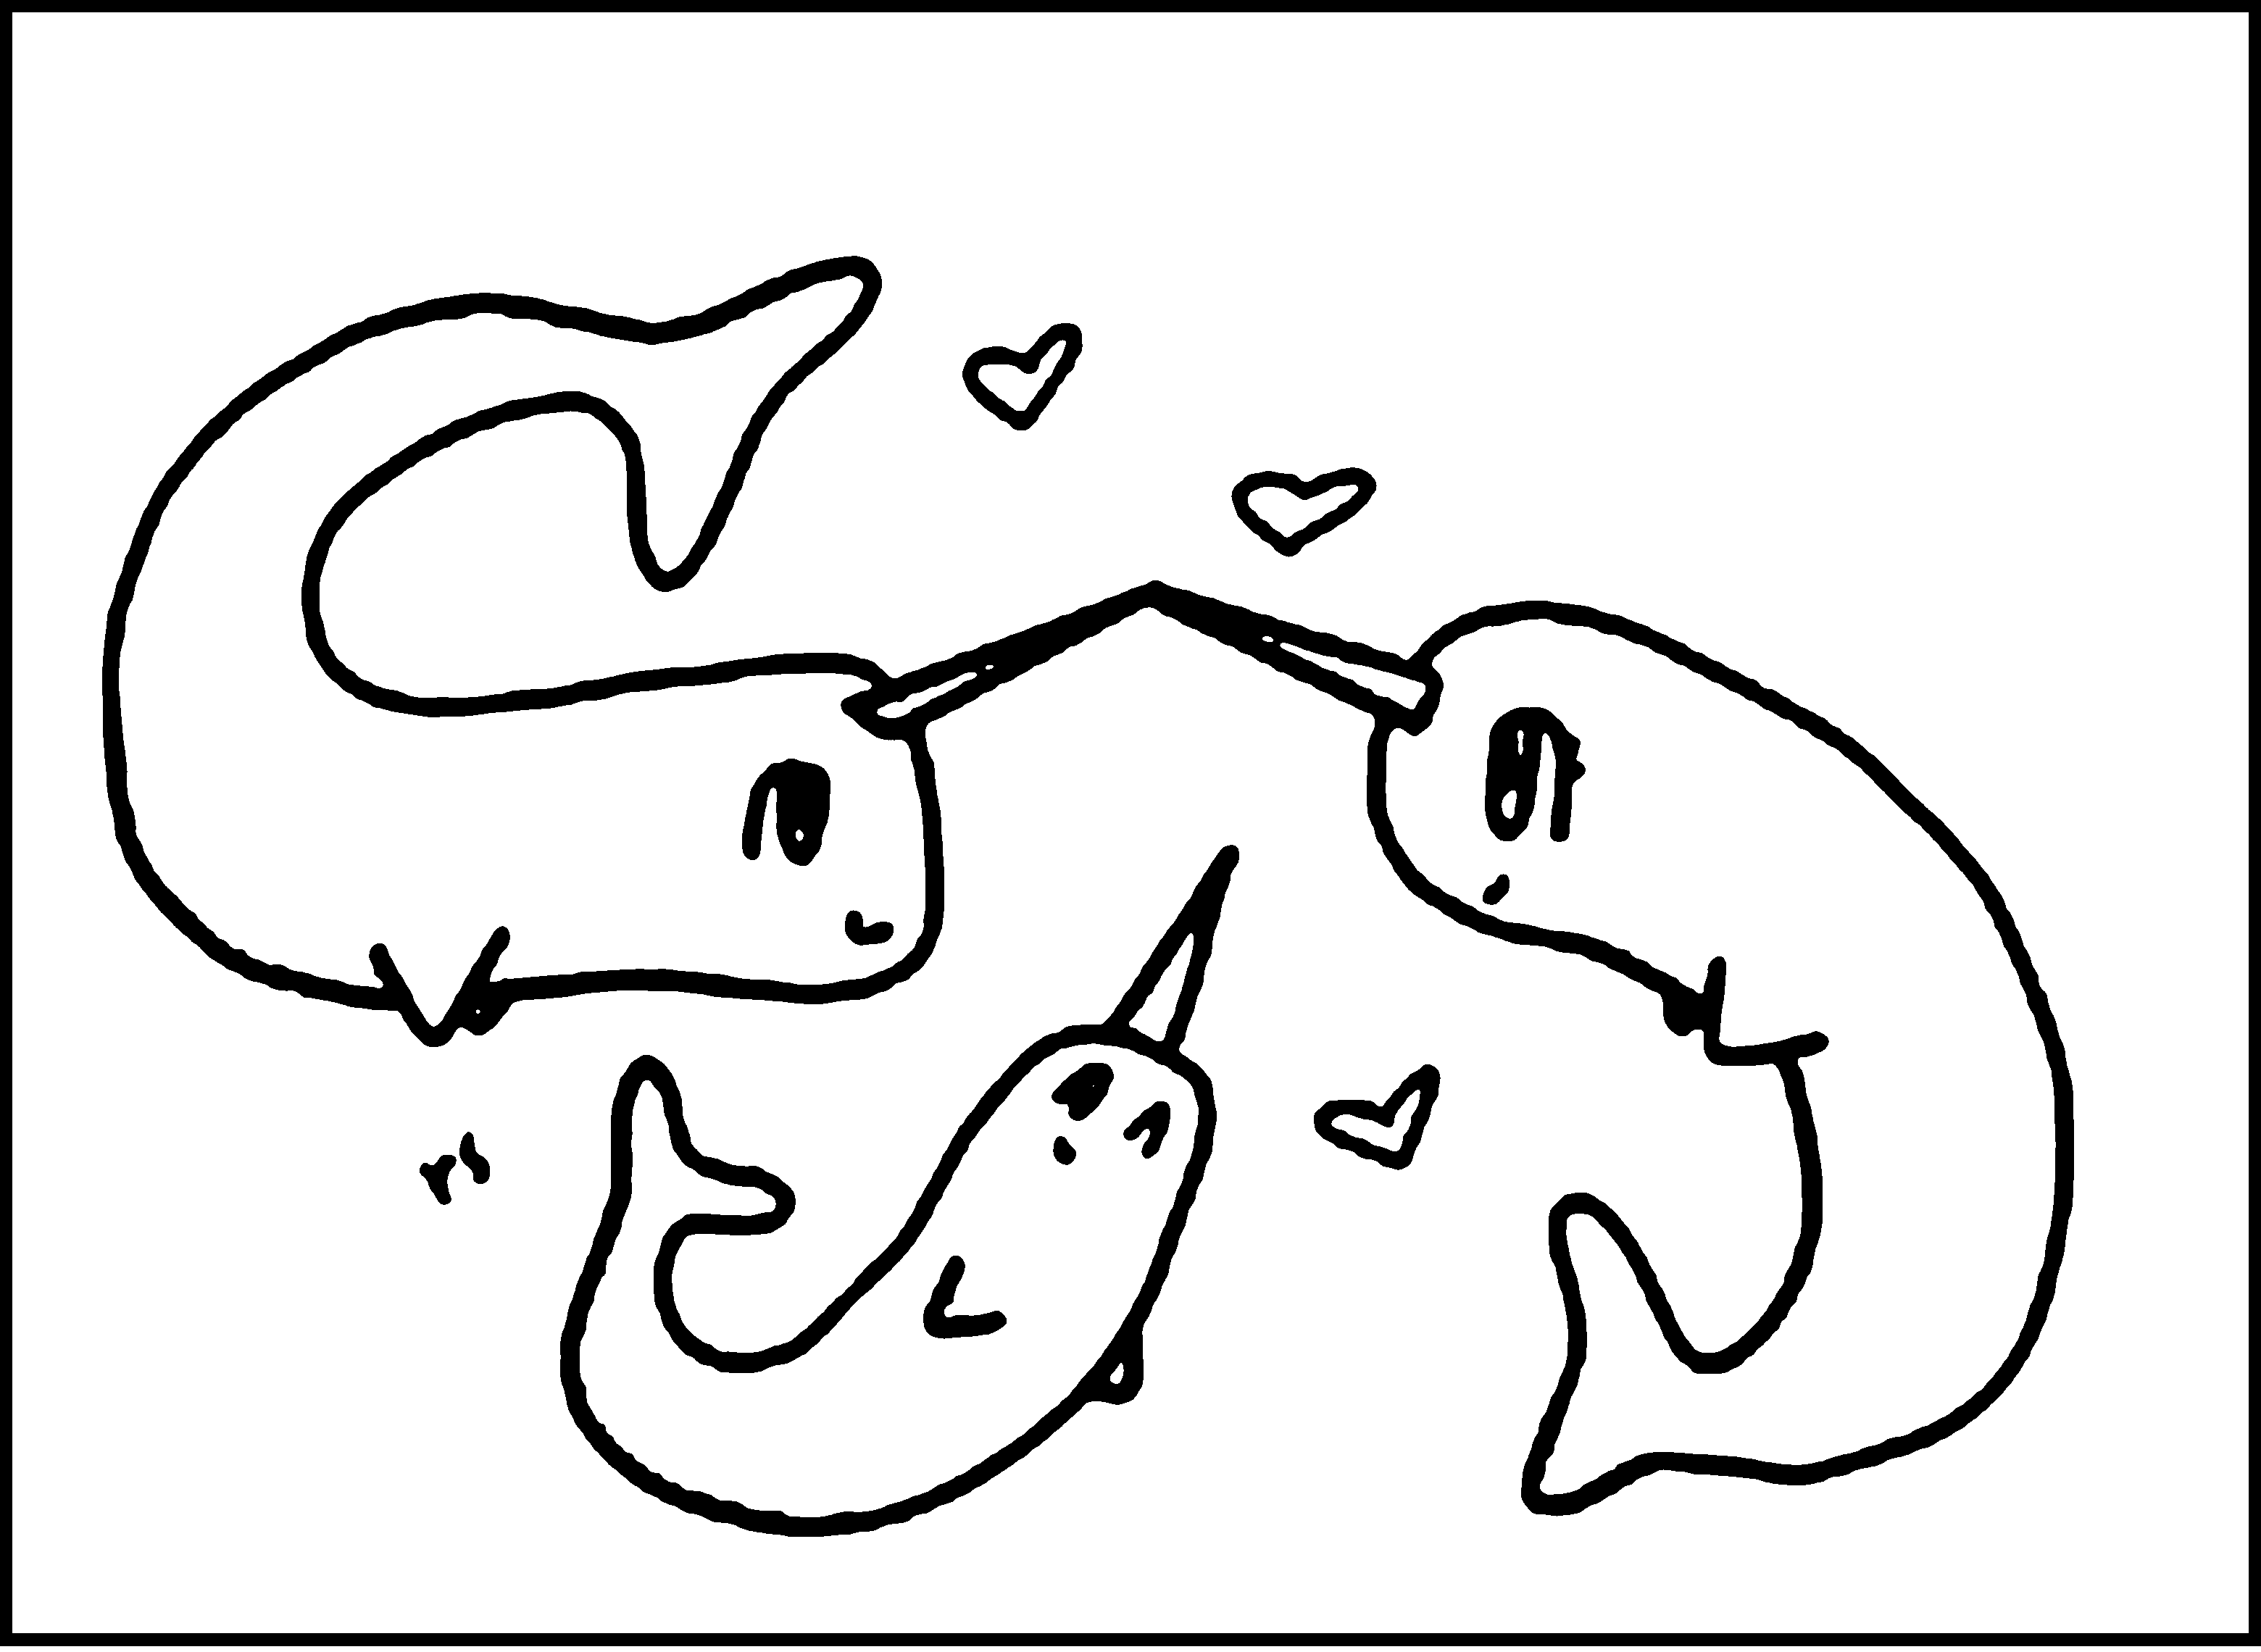 Narwhal Coloring Pages   Best Coloring Pages For Kids